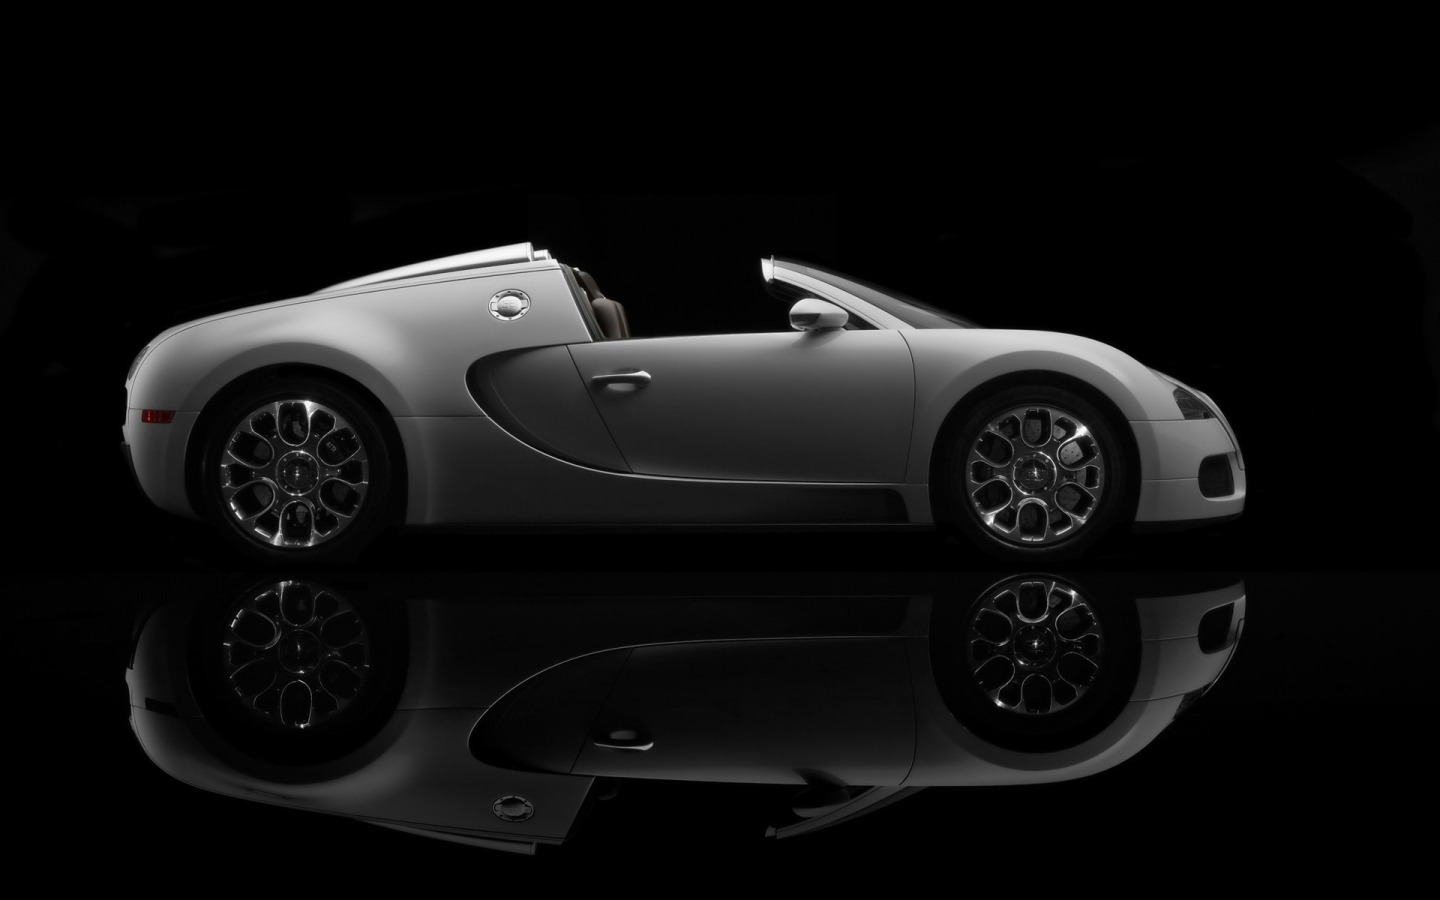 Bugatti Veyron 16.4 Grand Sport Production 2009 Version - Side Topless for 1440 x 900 widescreen resolution